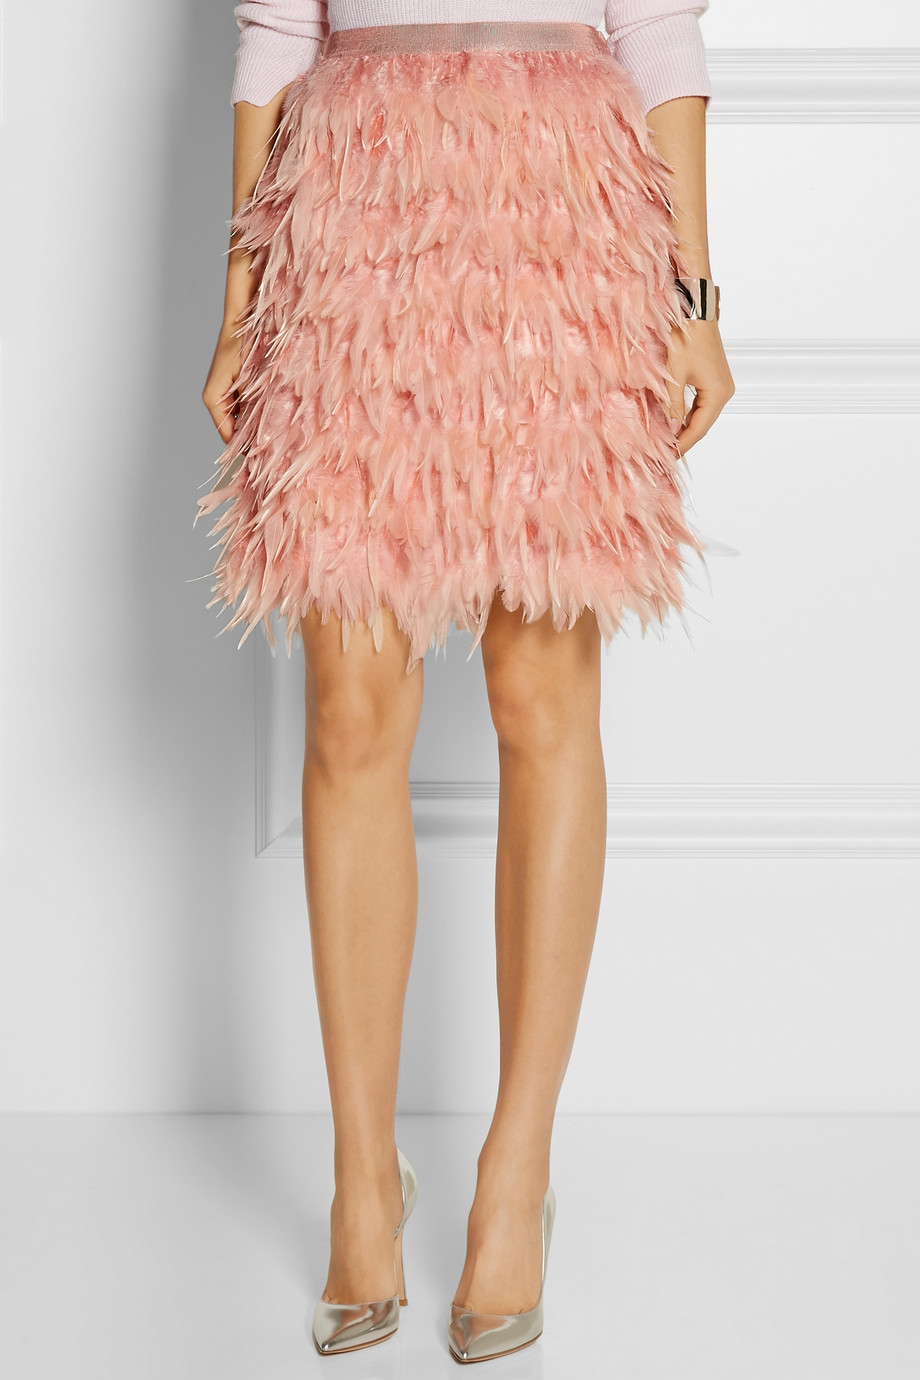 DKNY Feather And Silk Mini Skirt in Pink - Lyst